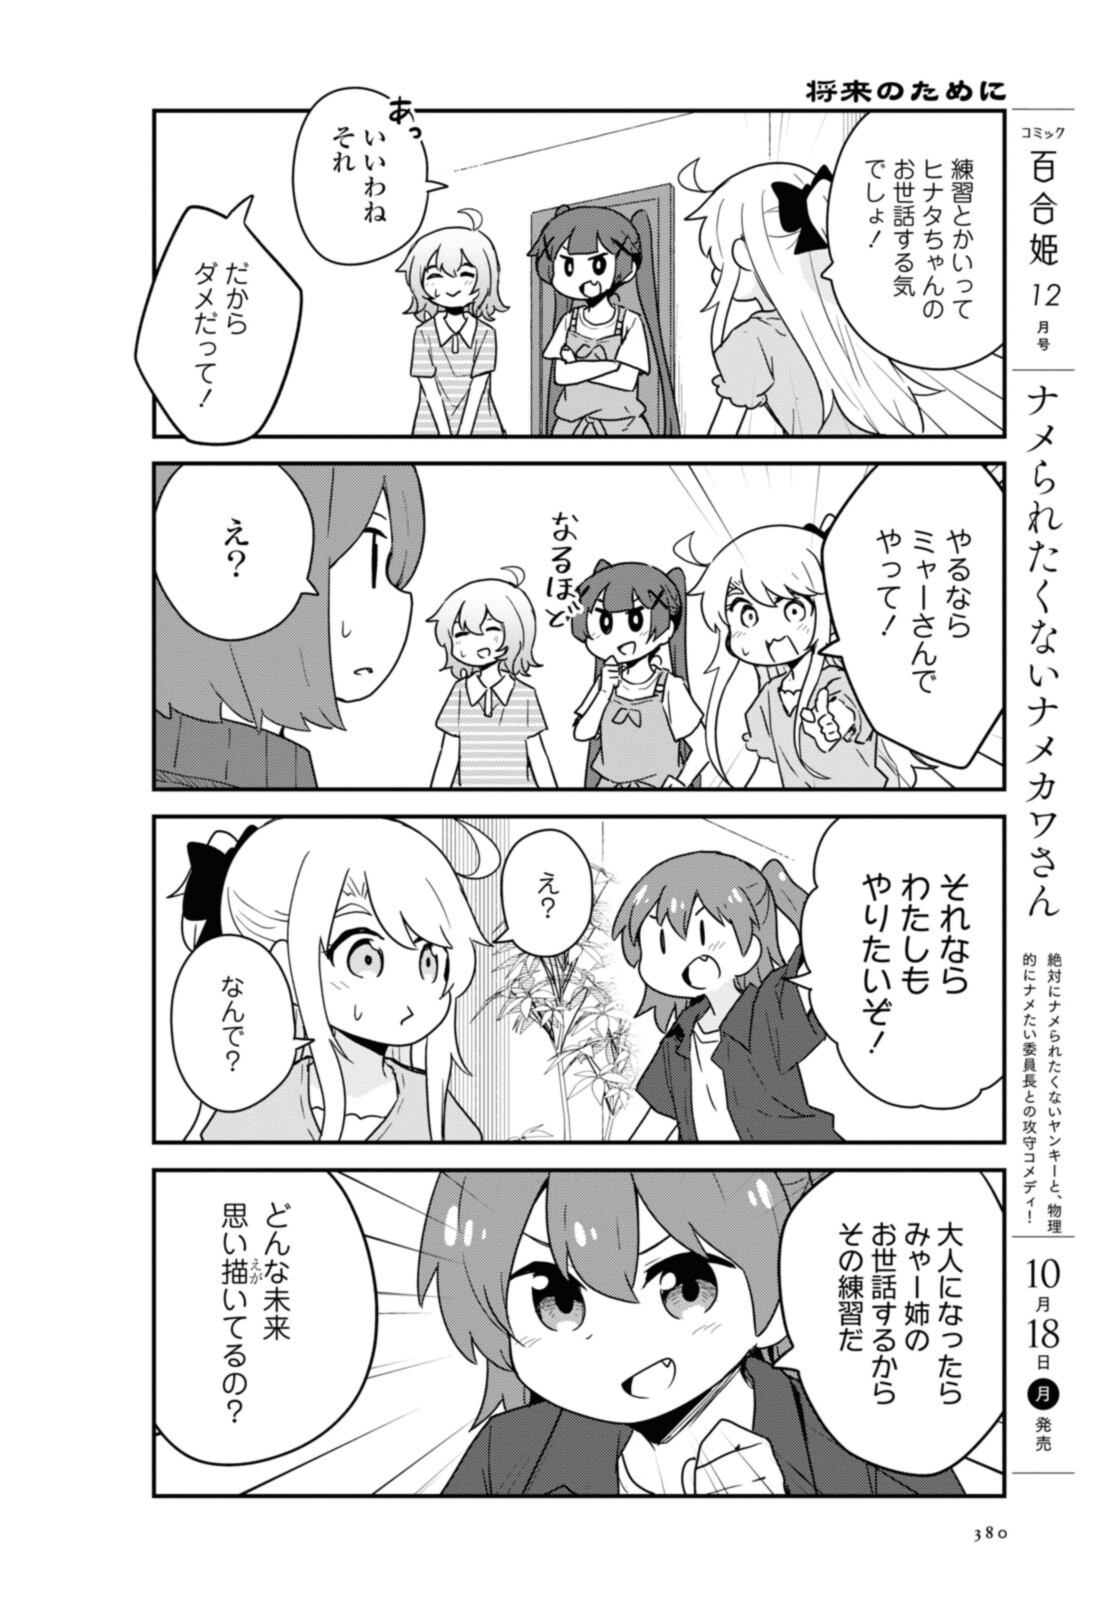 Wataten! An Angel Flew Down to Me 私に天使が舞い降りた！ 第87.1話 - Page 4